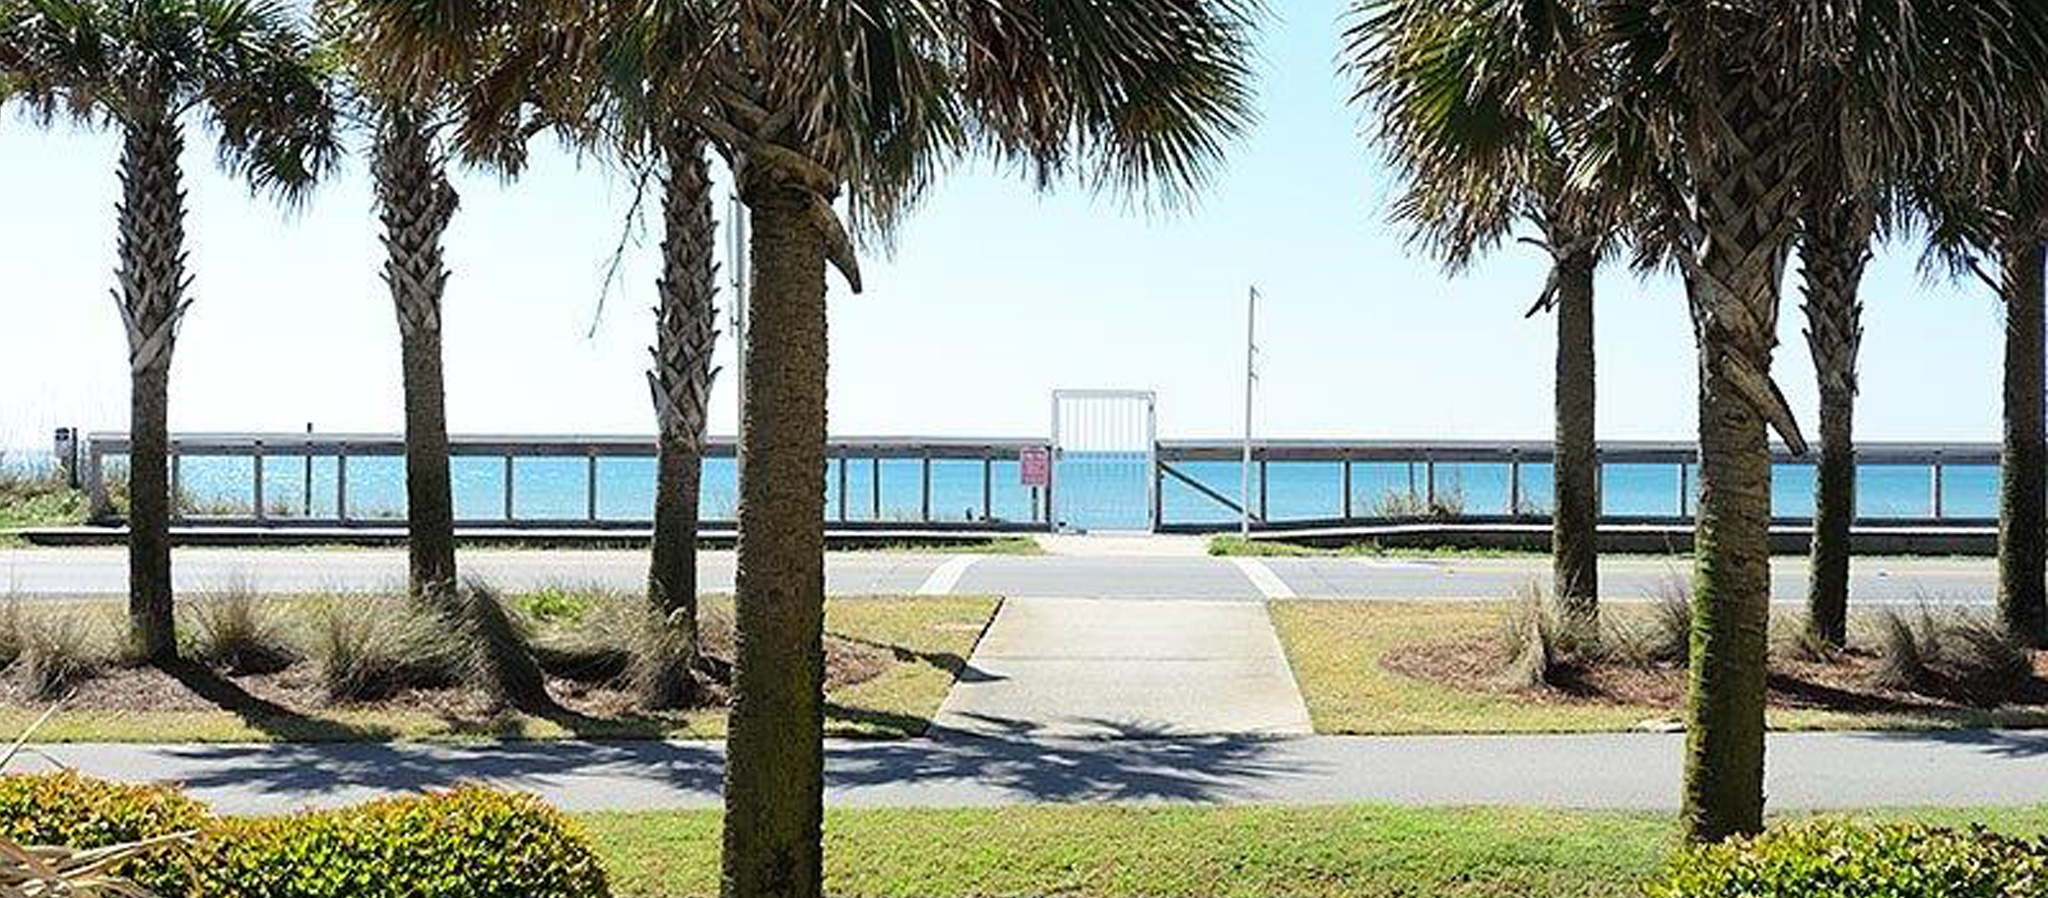 Our vacation rentals are near Silver Sands factory outlet stores and shopping.